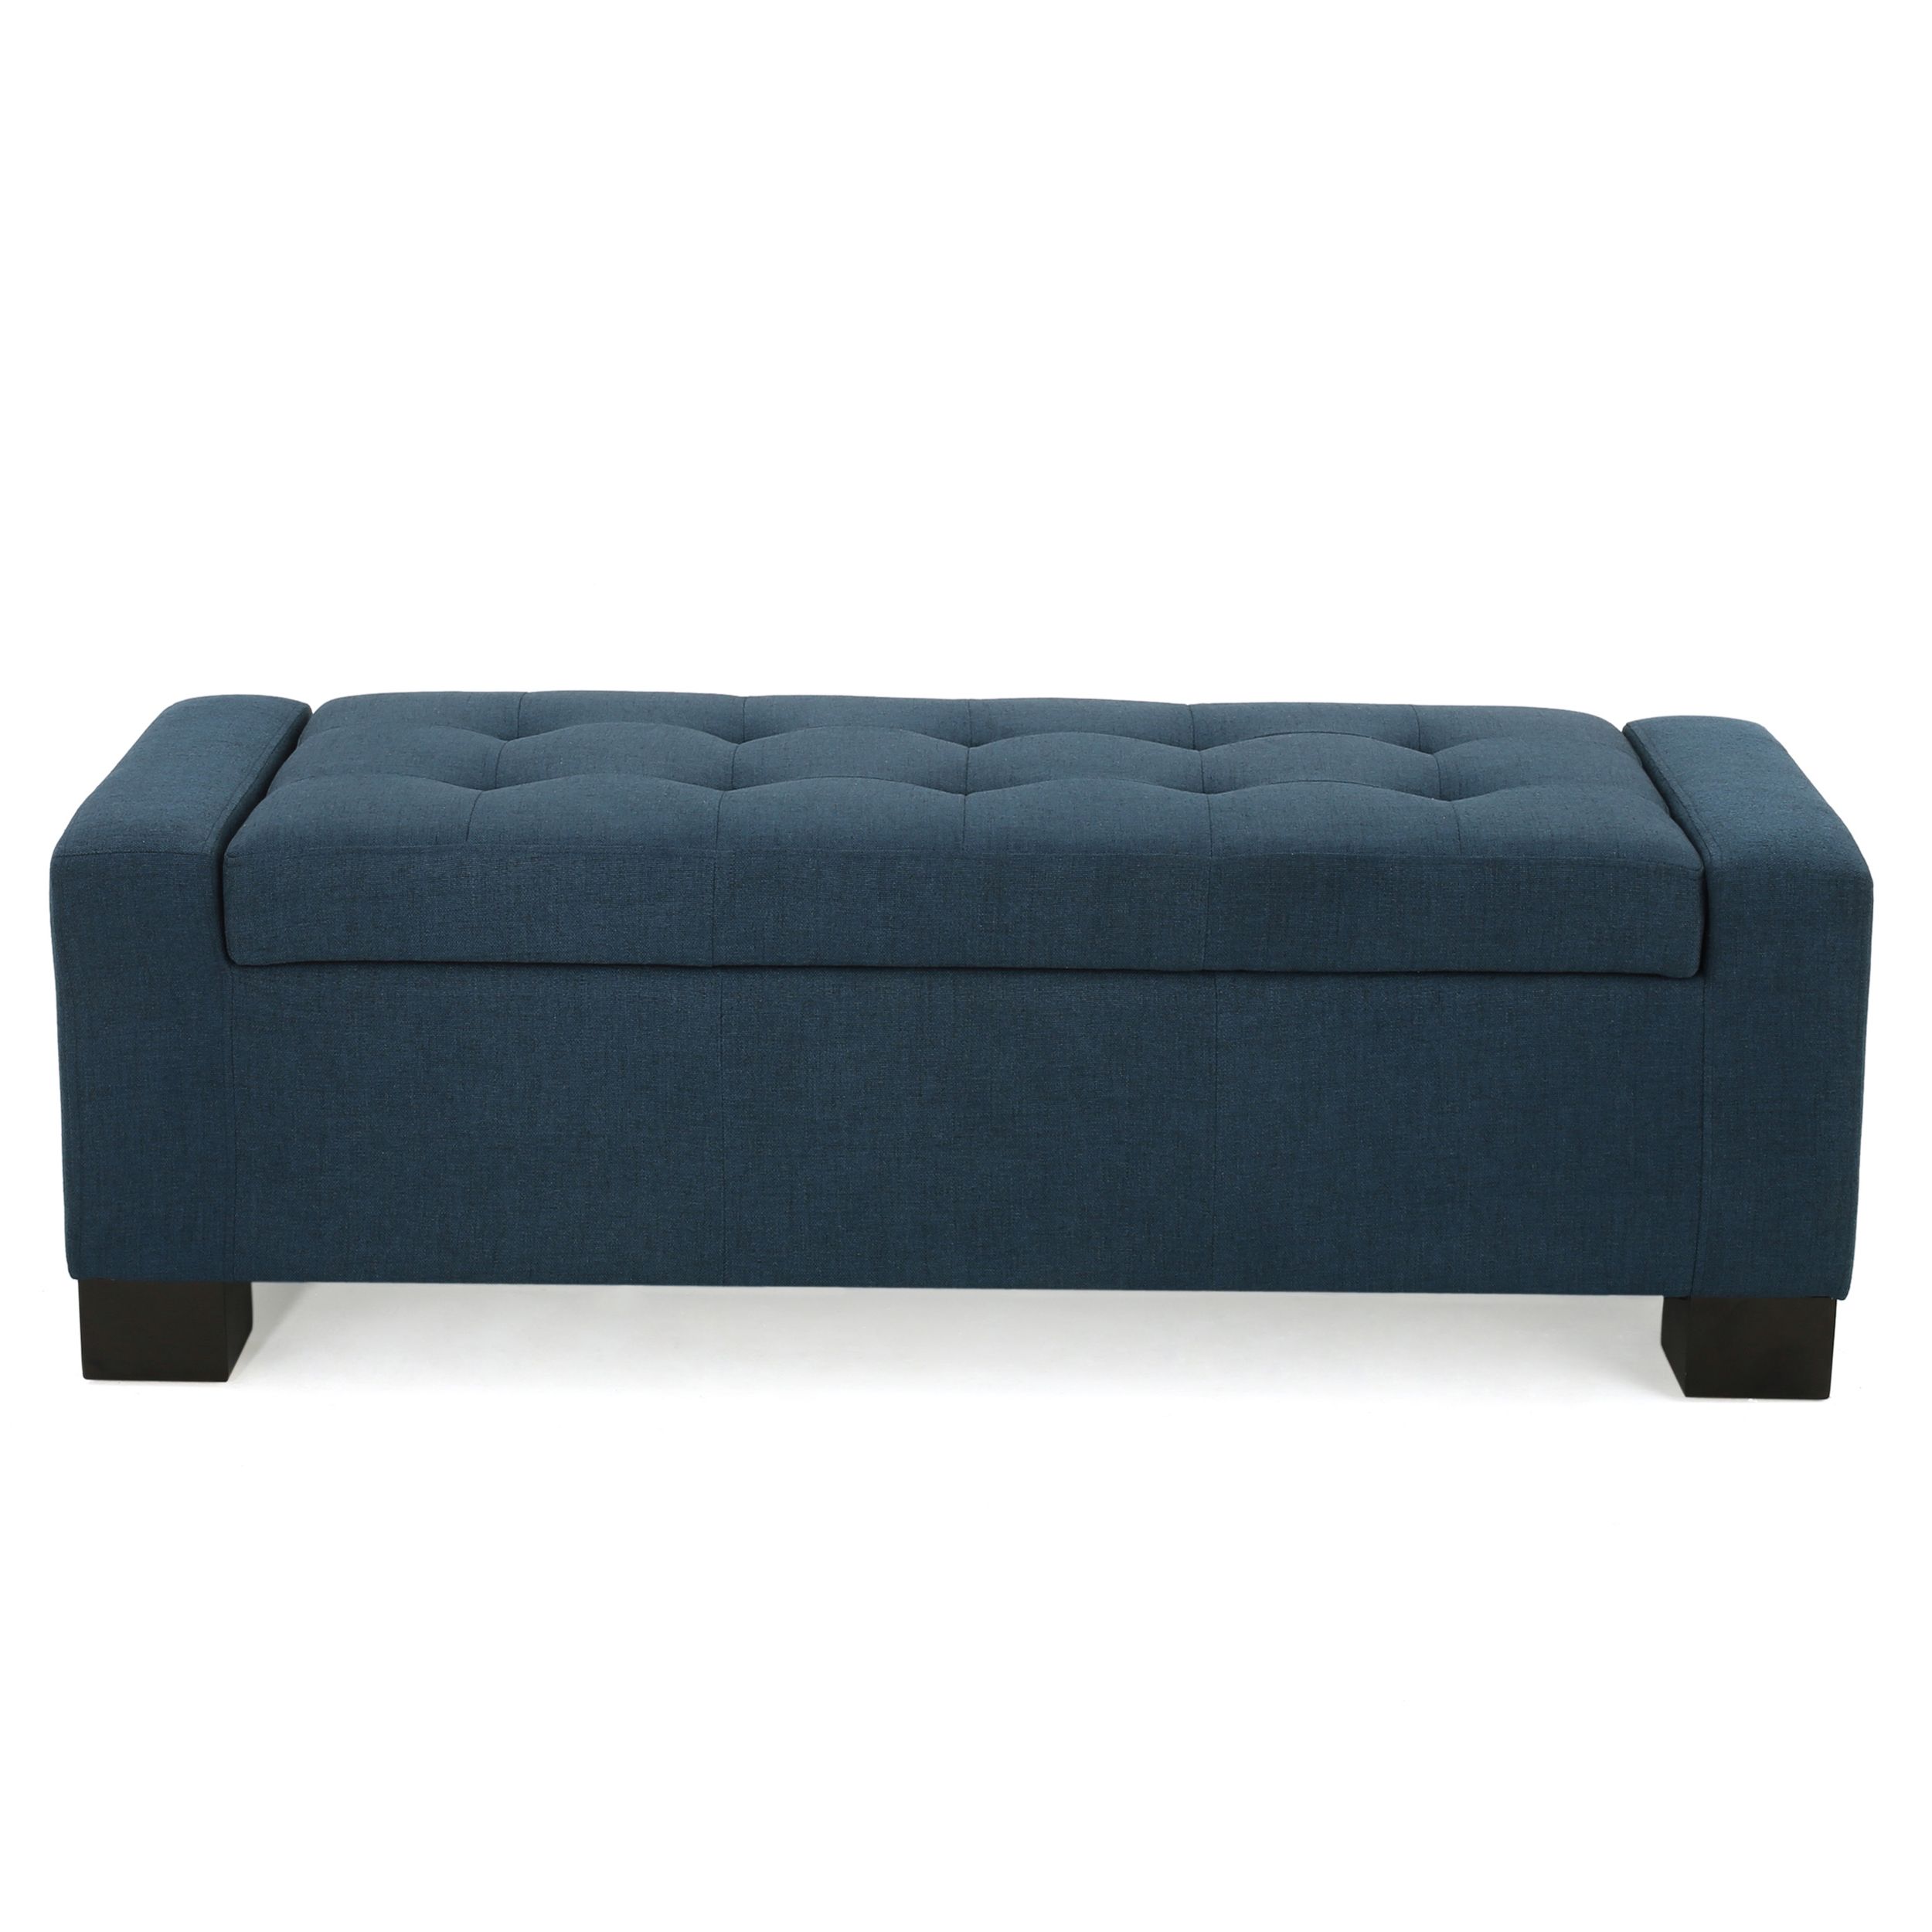 Fabric Tufted Storage Ottomans Intended For Trendy Lawson Contemporary Tufted Fabric Storage Ottoman Bench, Dark Blue (View 3 of 10)